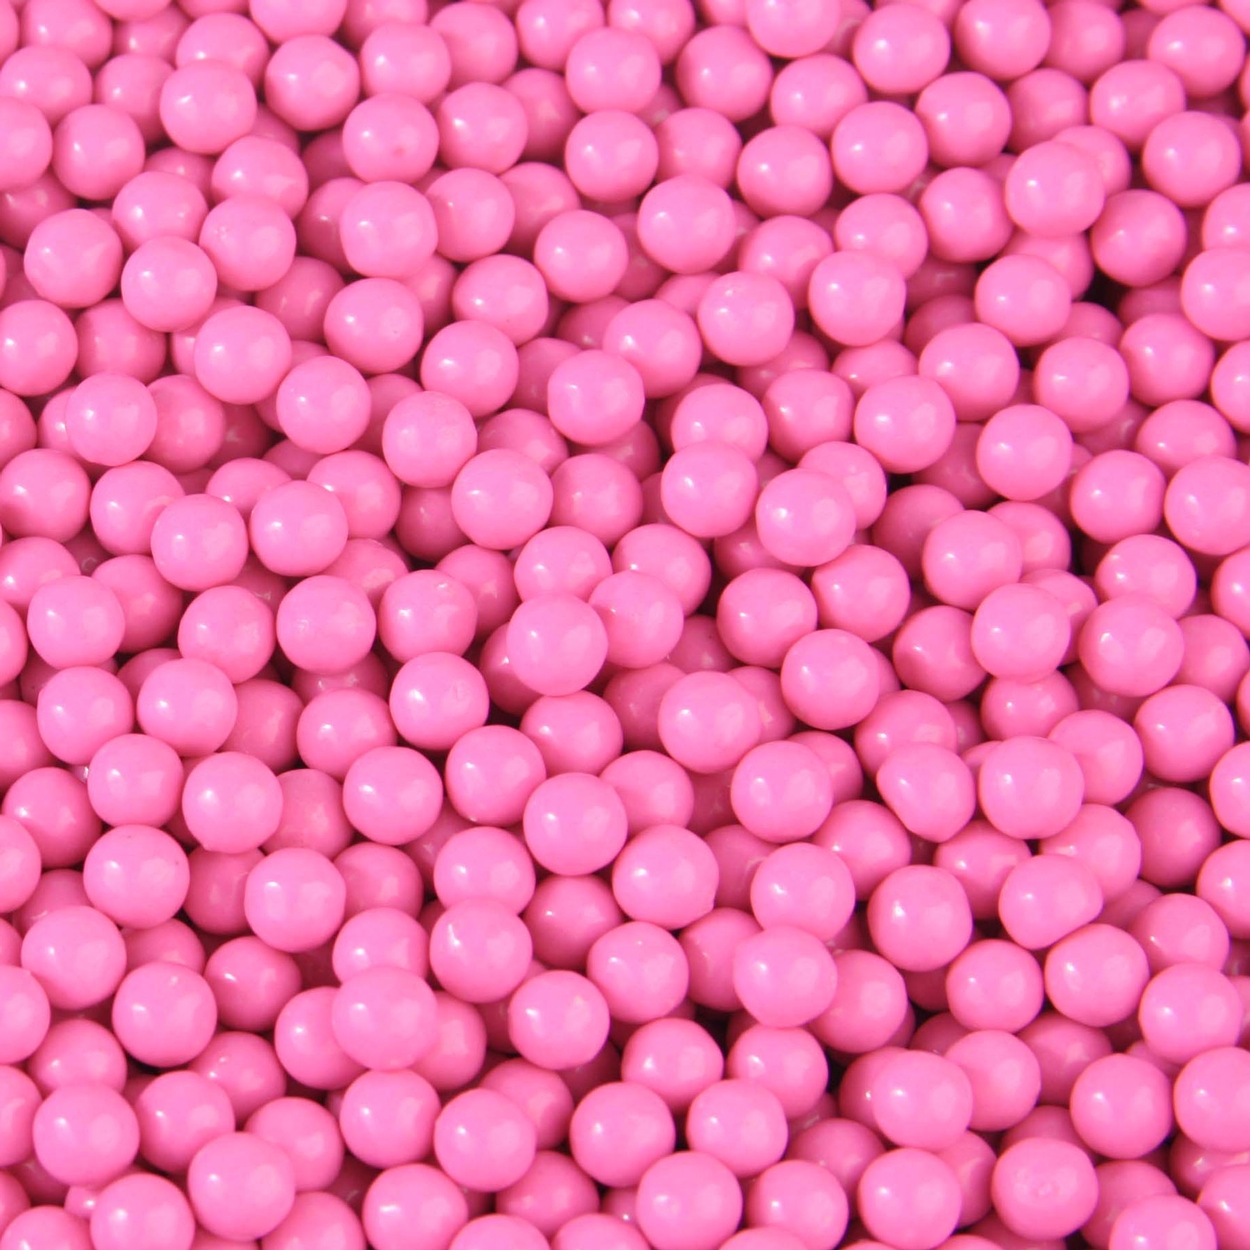 Hot Pink Candy Beads • Candy Beads • Unwrapped Candy • Bulk Candy